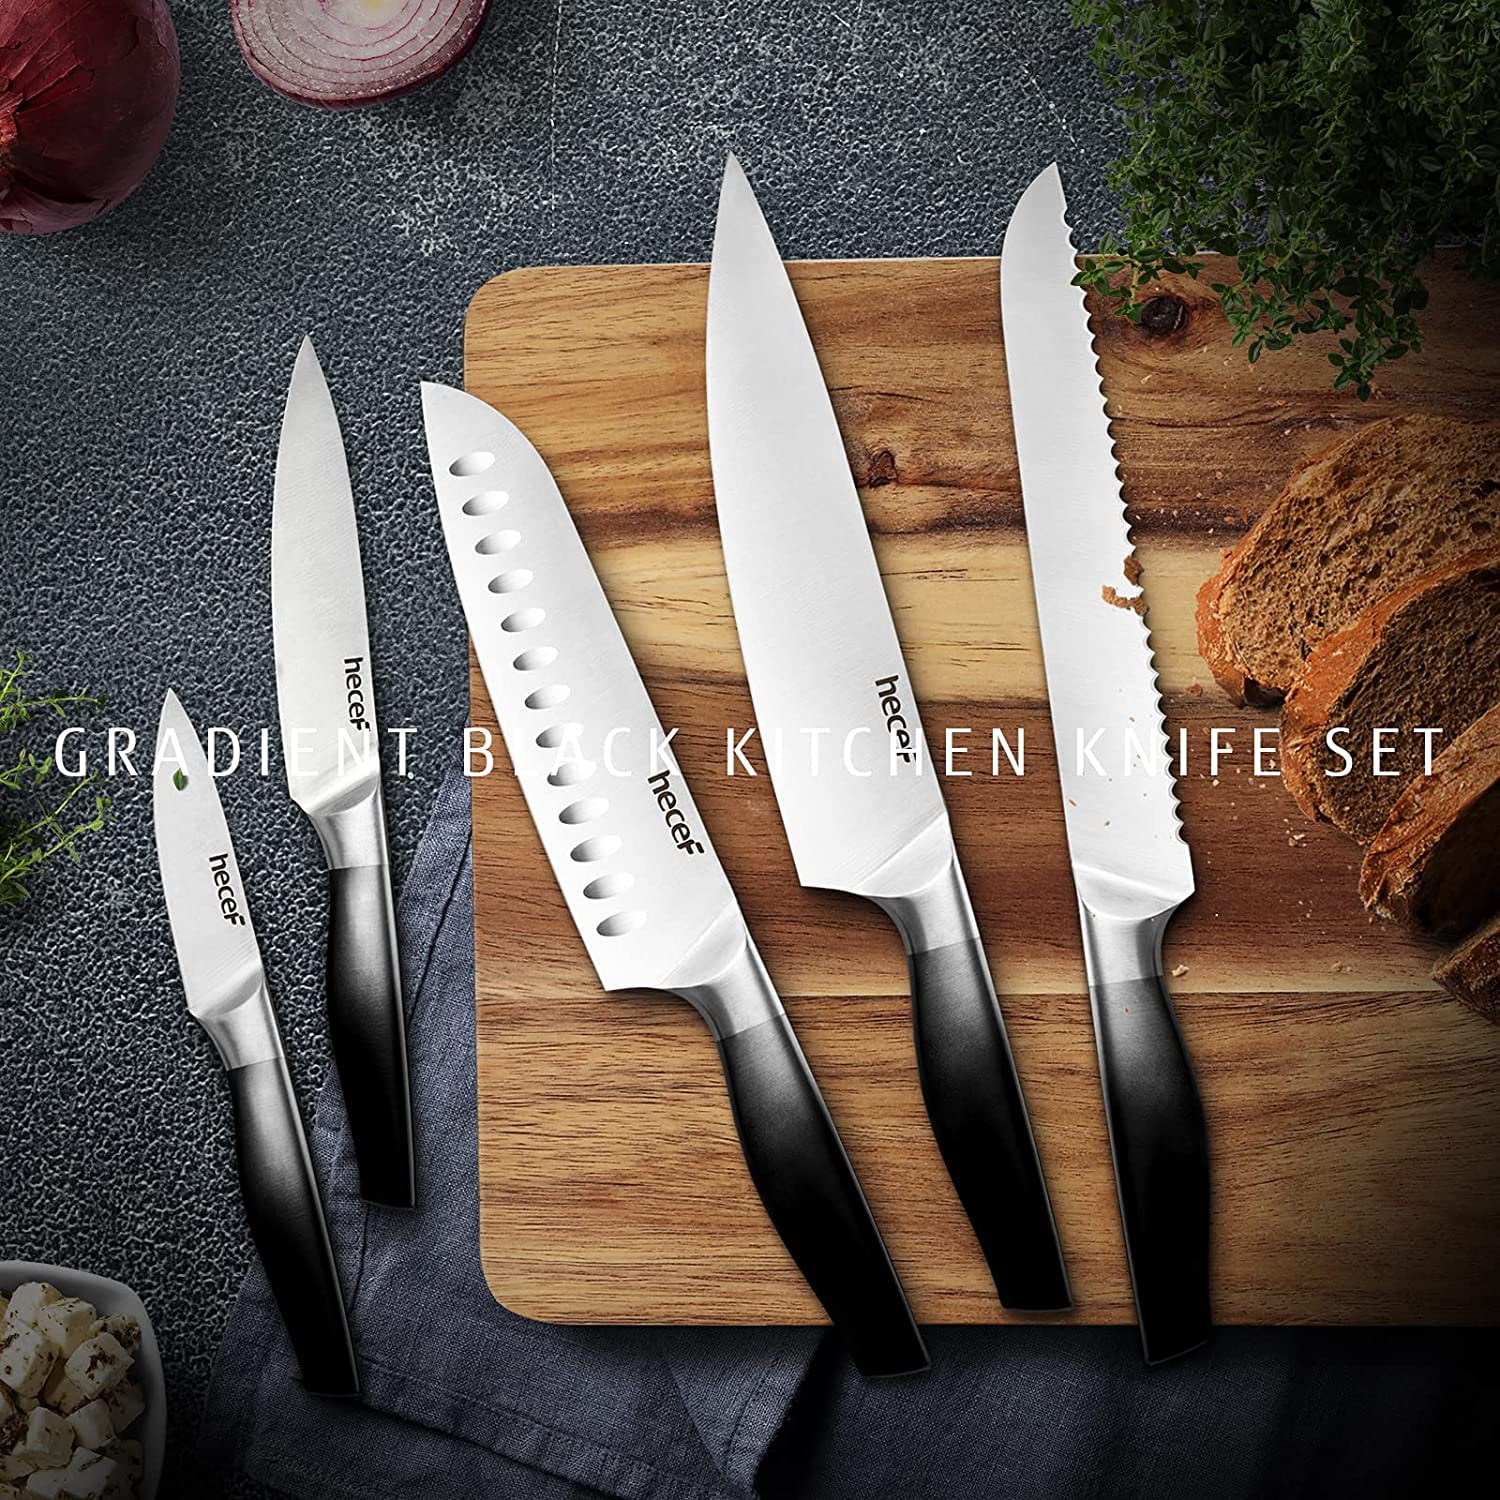  hecef 5 PCS Non-stick Coated Kitchen Knife Set with PP Handle  and Protective Sheath, Exclusive Black Chef knife set, Scratch Resistance &  Rust Proof (Lightning pattern): Home & Kitchen